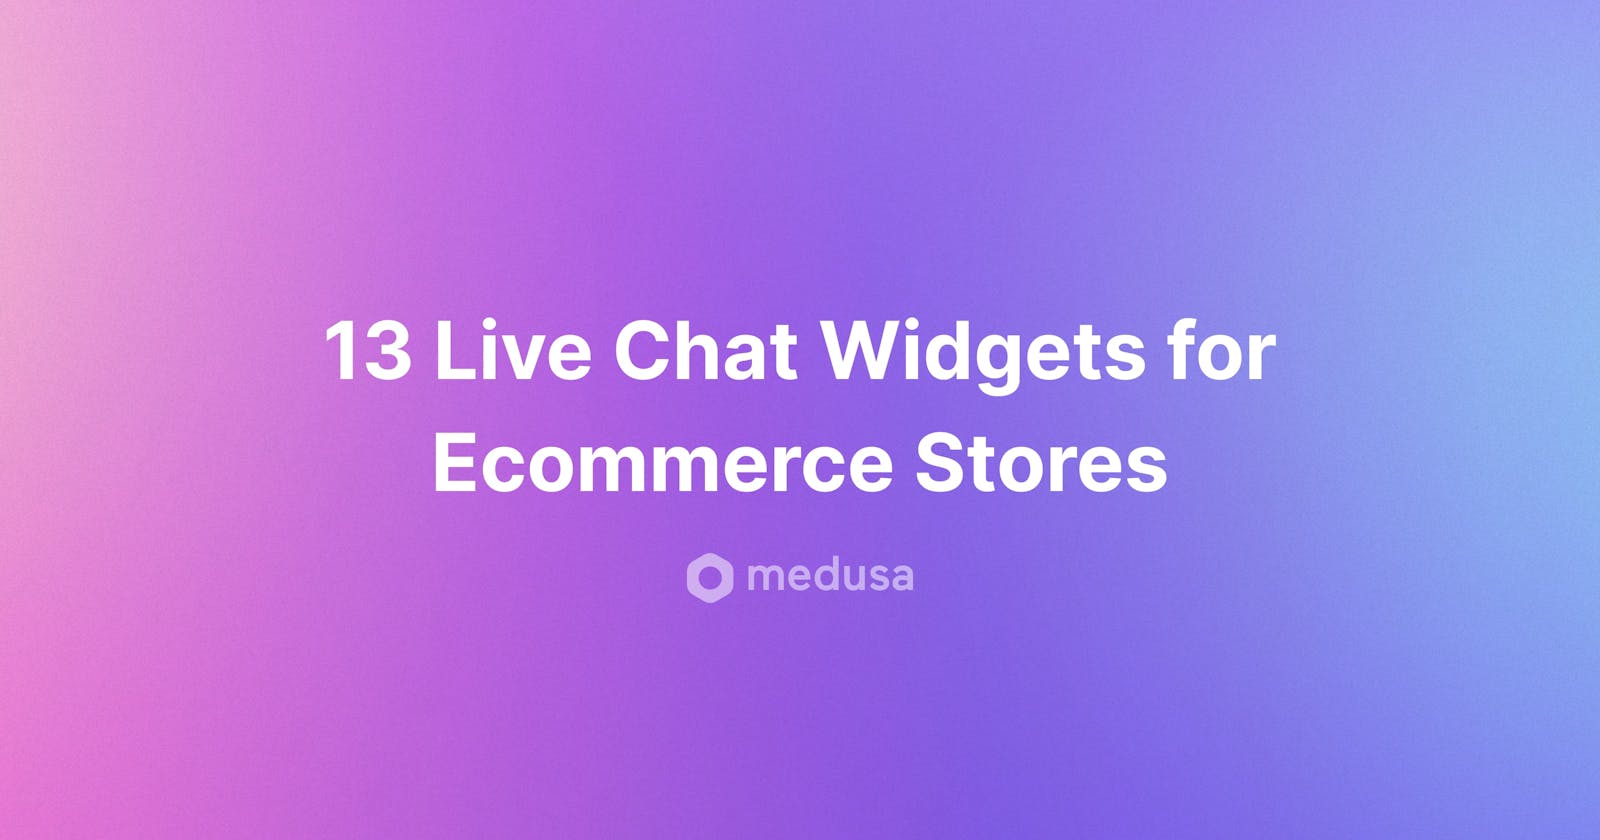 13 Live Chat Widgets for Ecommerce Stores